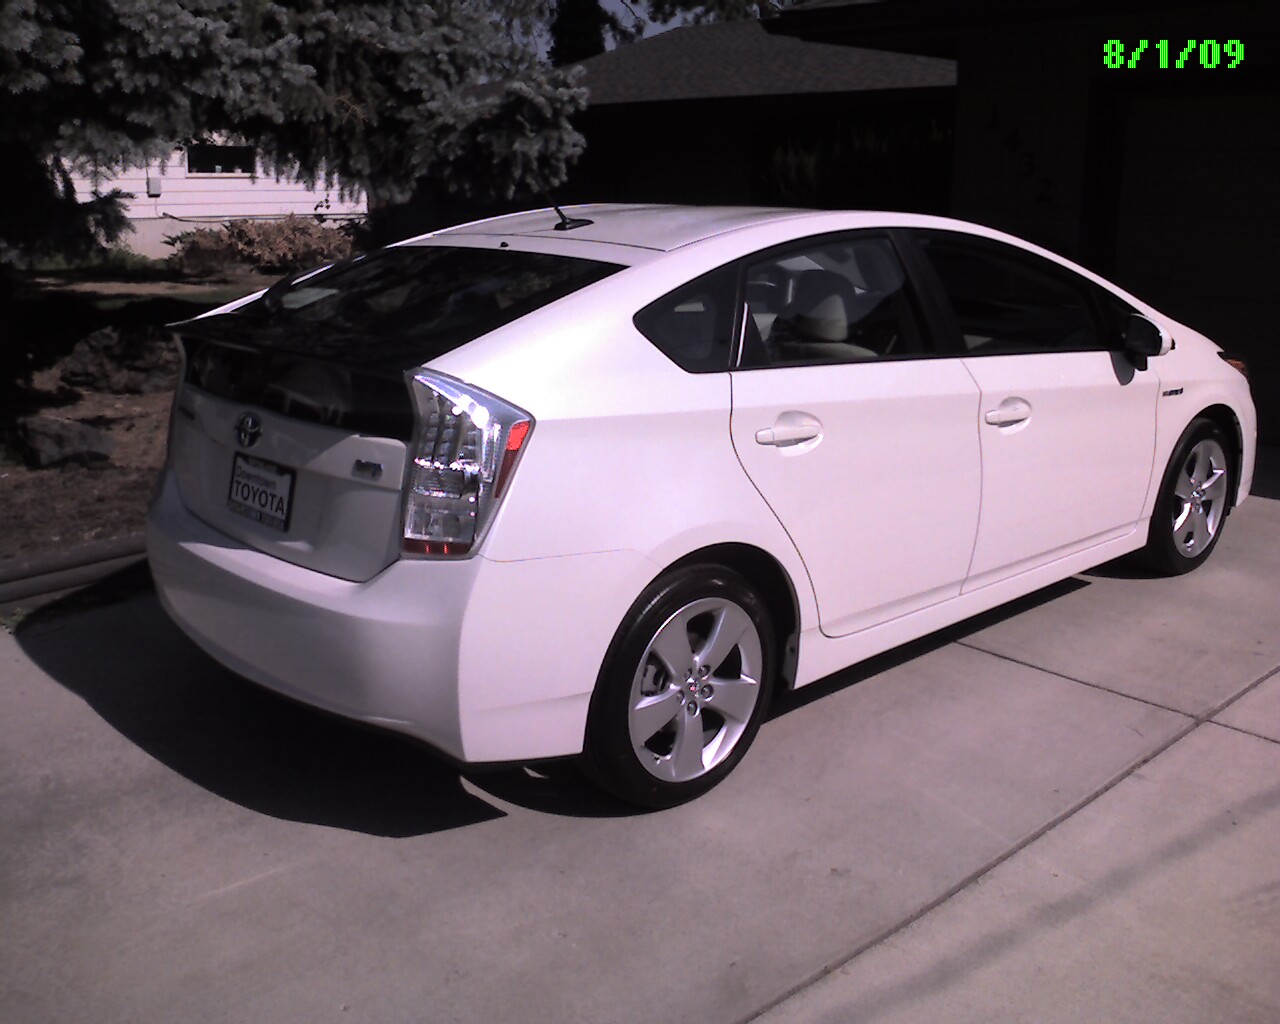 Why I Will NOT Be Buying Another Prius